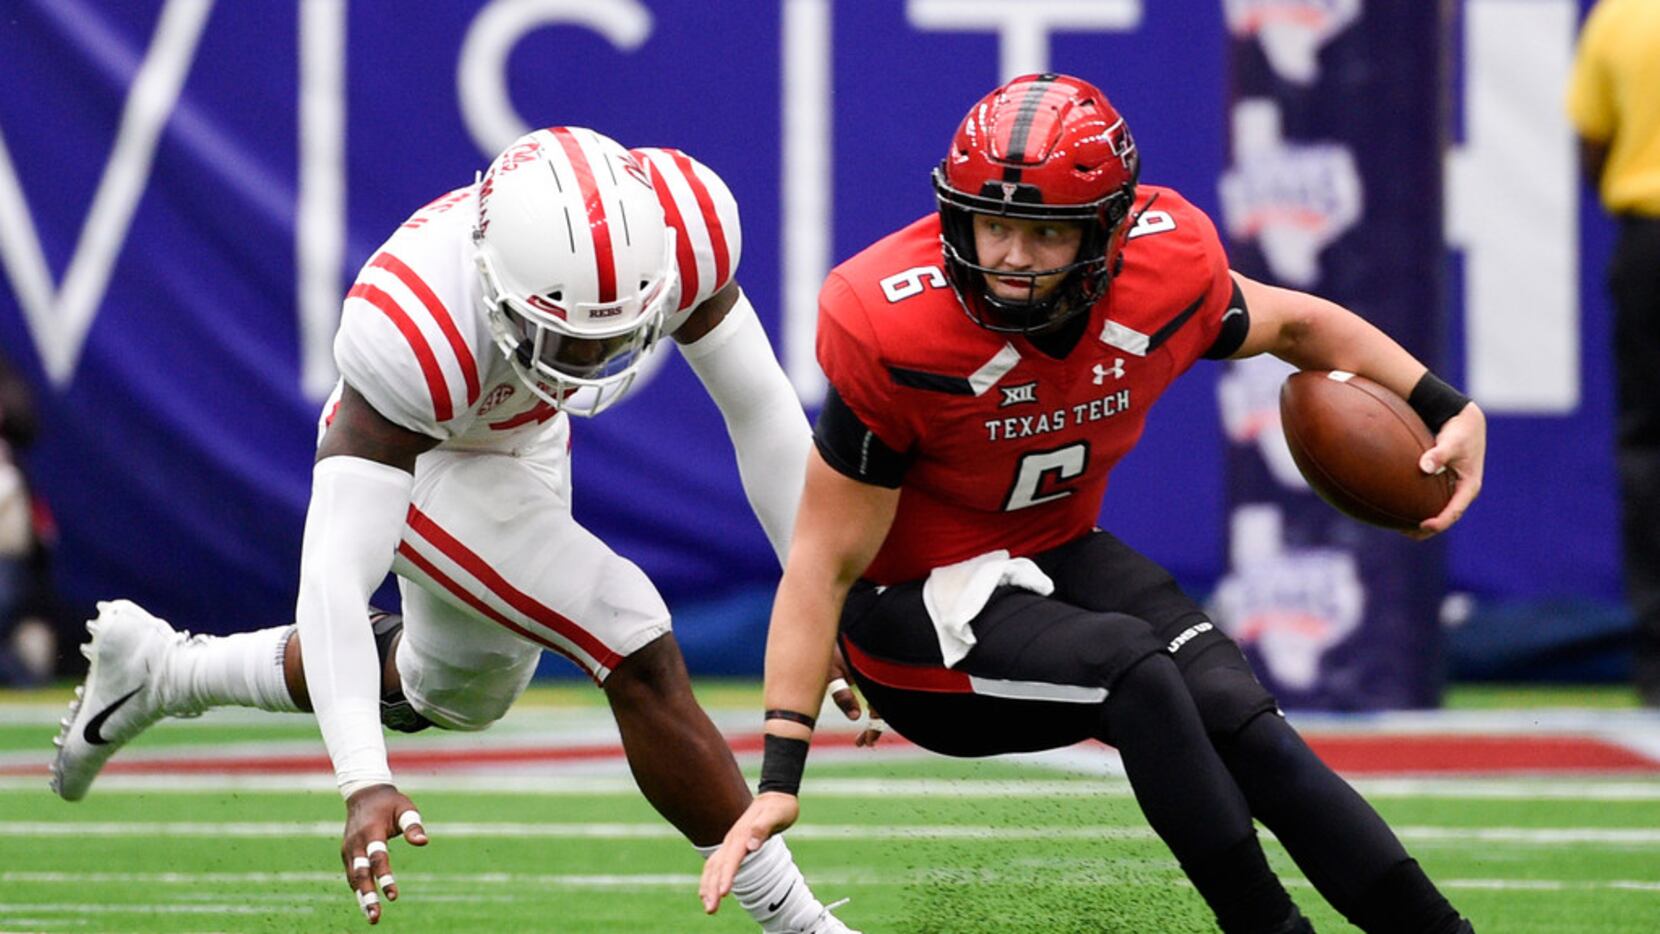 Texas Tech quarterback McLane Carter escapes a would-be tackle by Ole Miss defensive end...